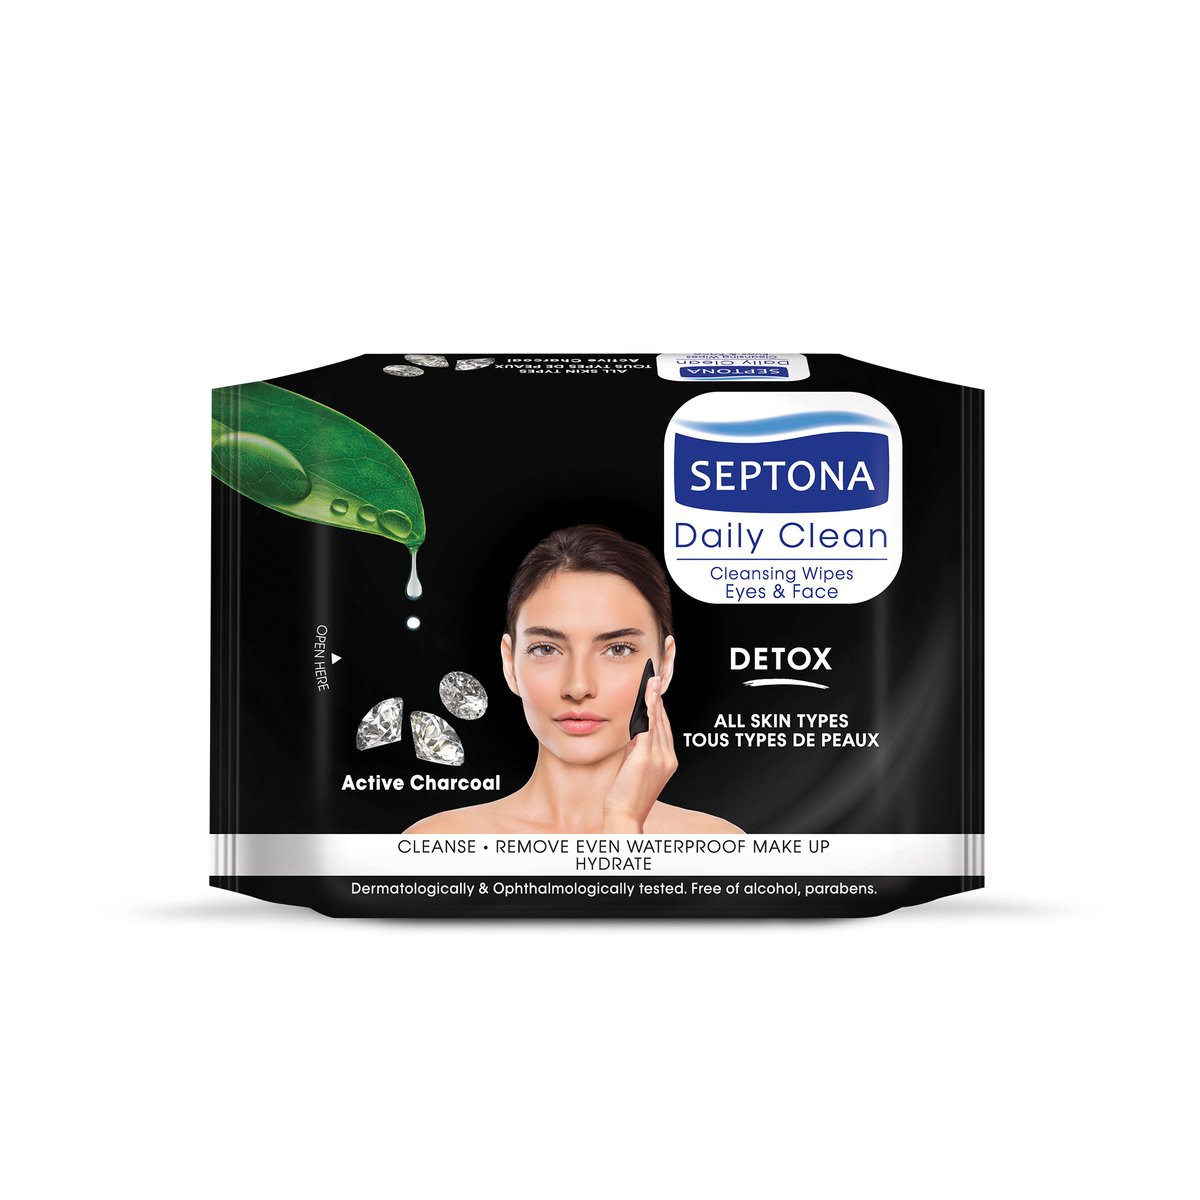 Septona Daily Clean Cleansing Wipes Active Charcoal 20pcs